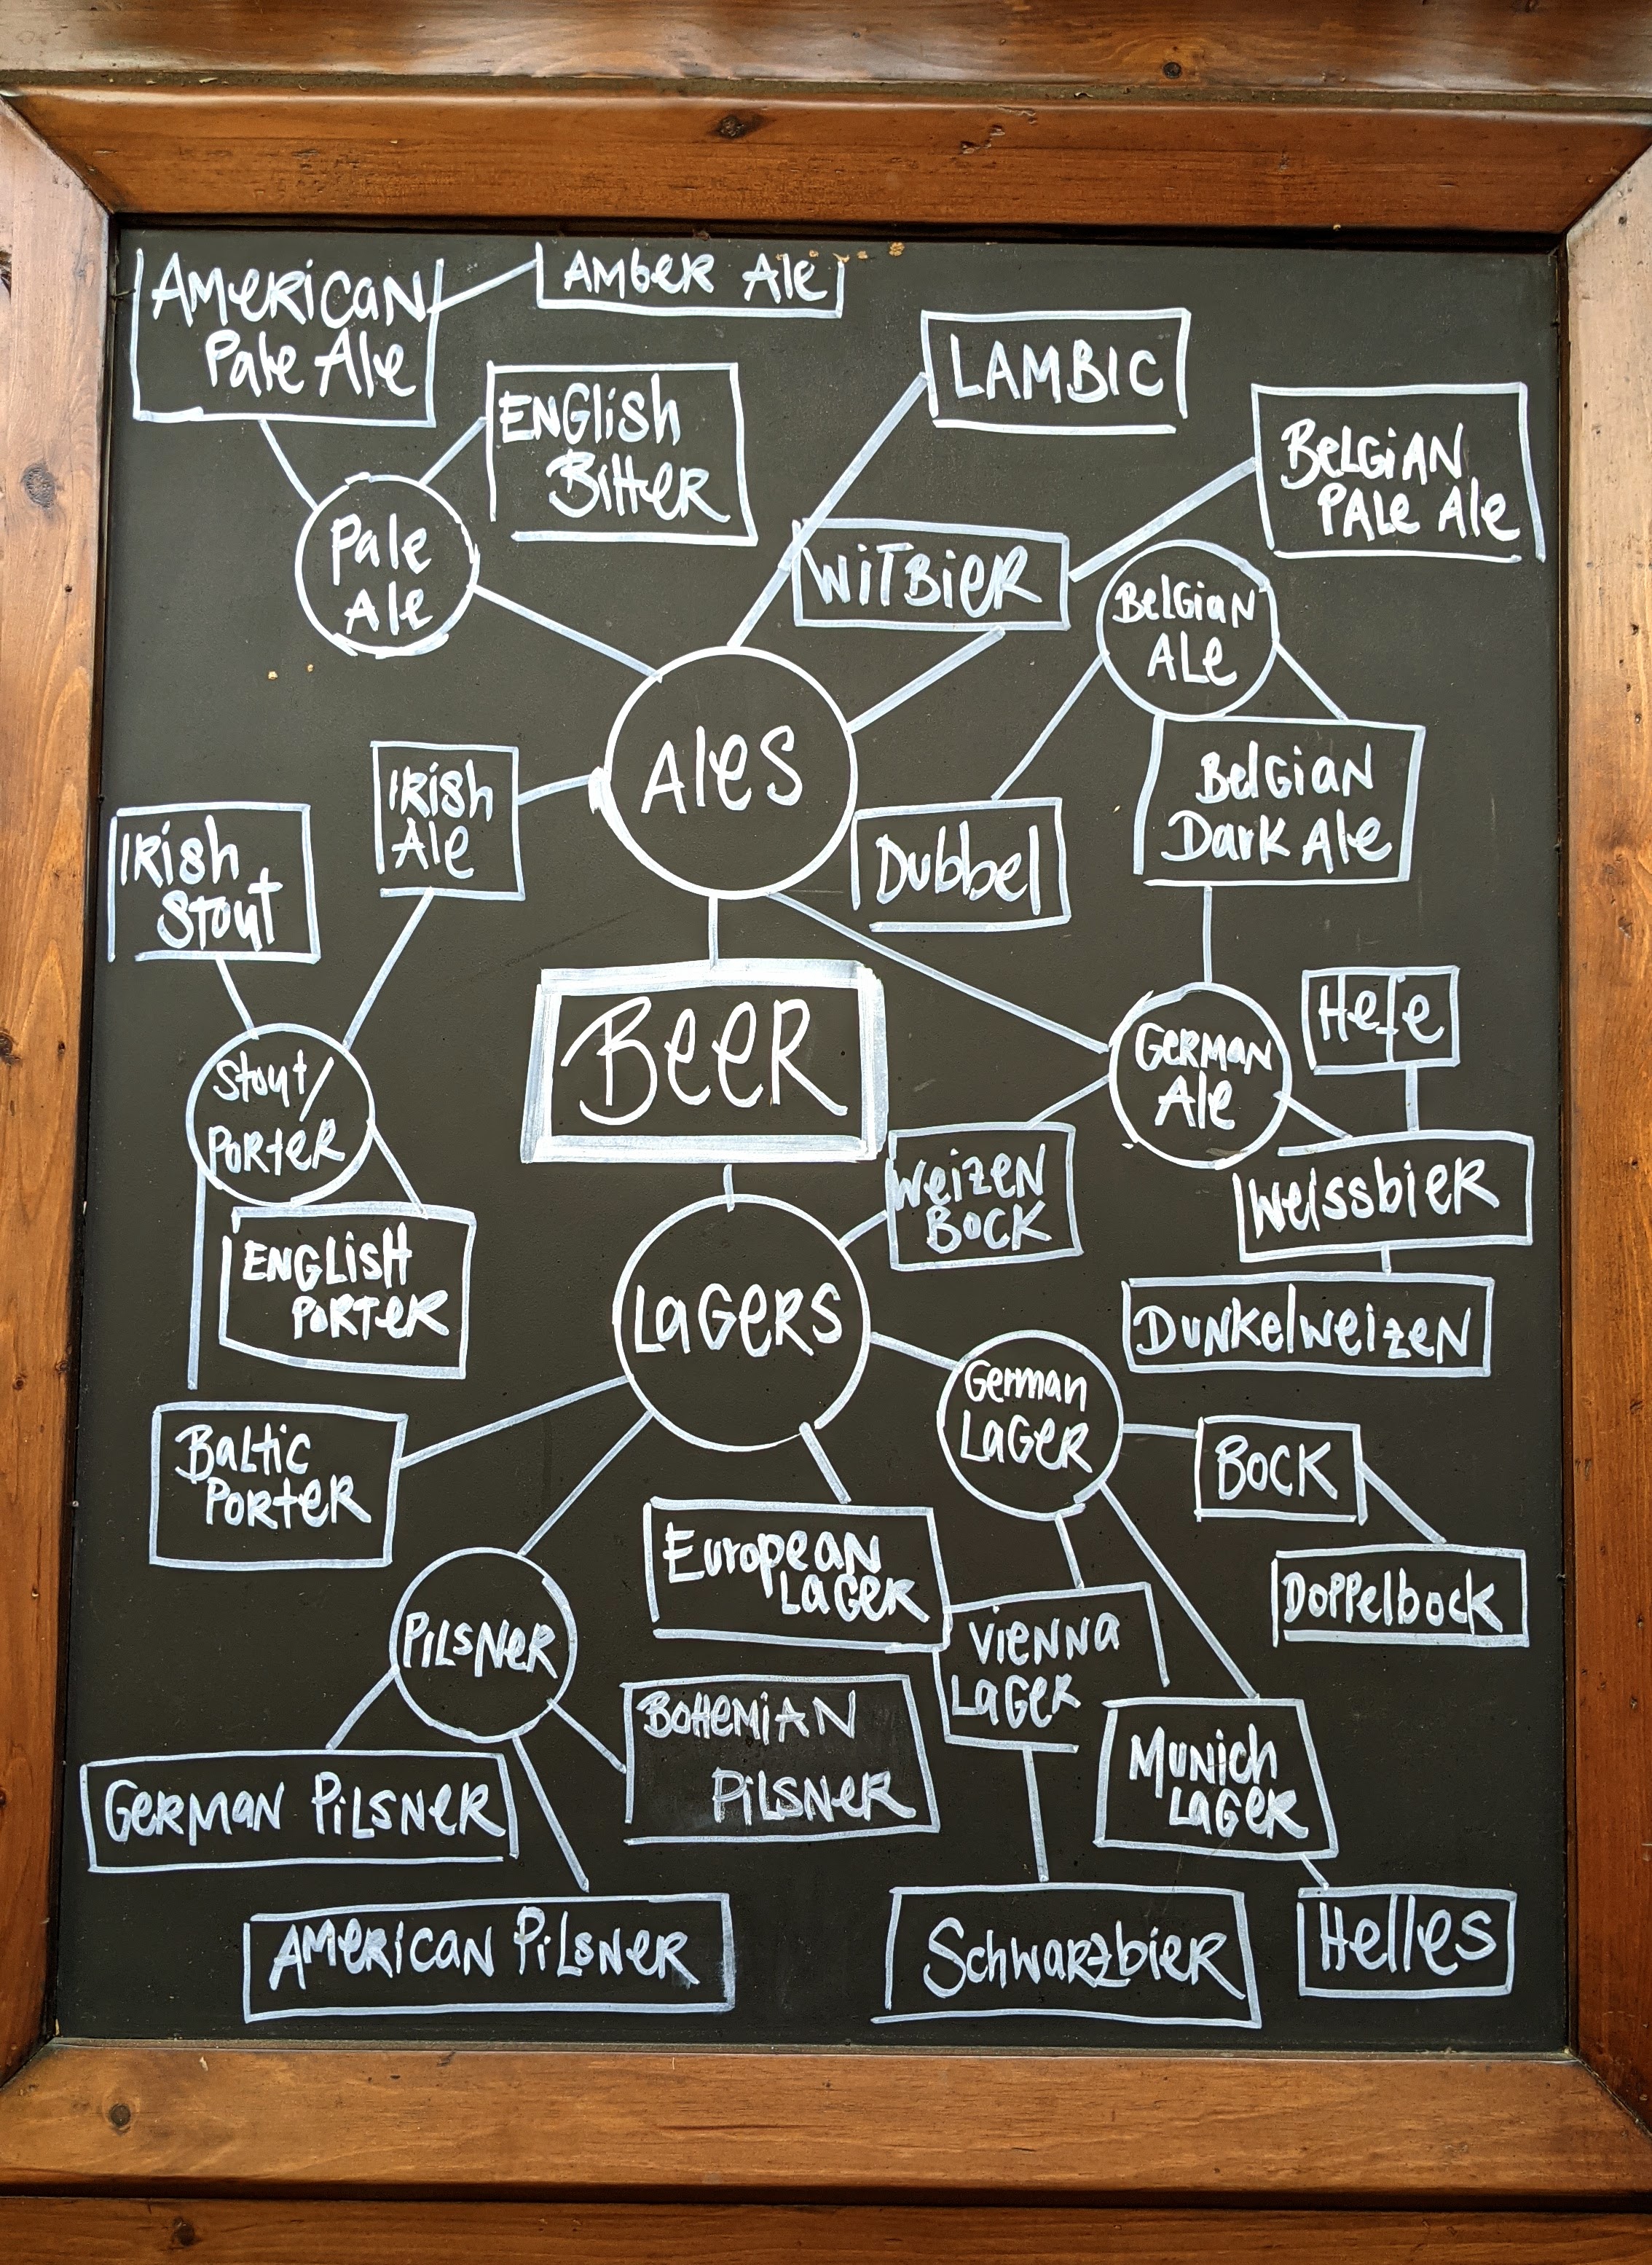 Beer family tree on a sign/poster in a Wellington pub